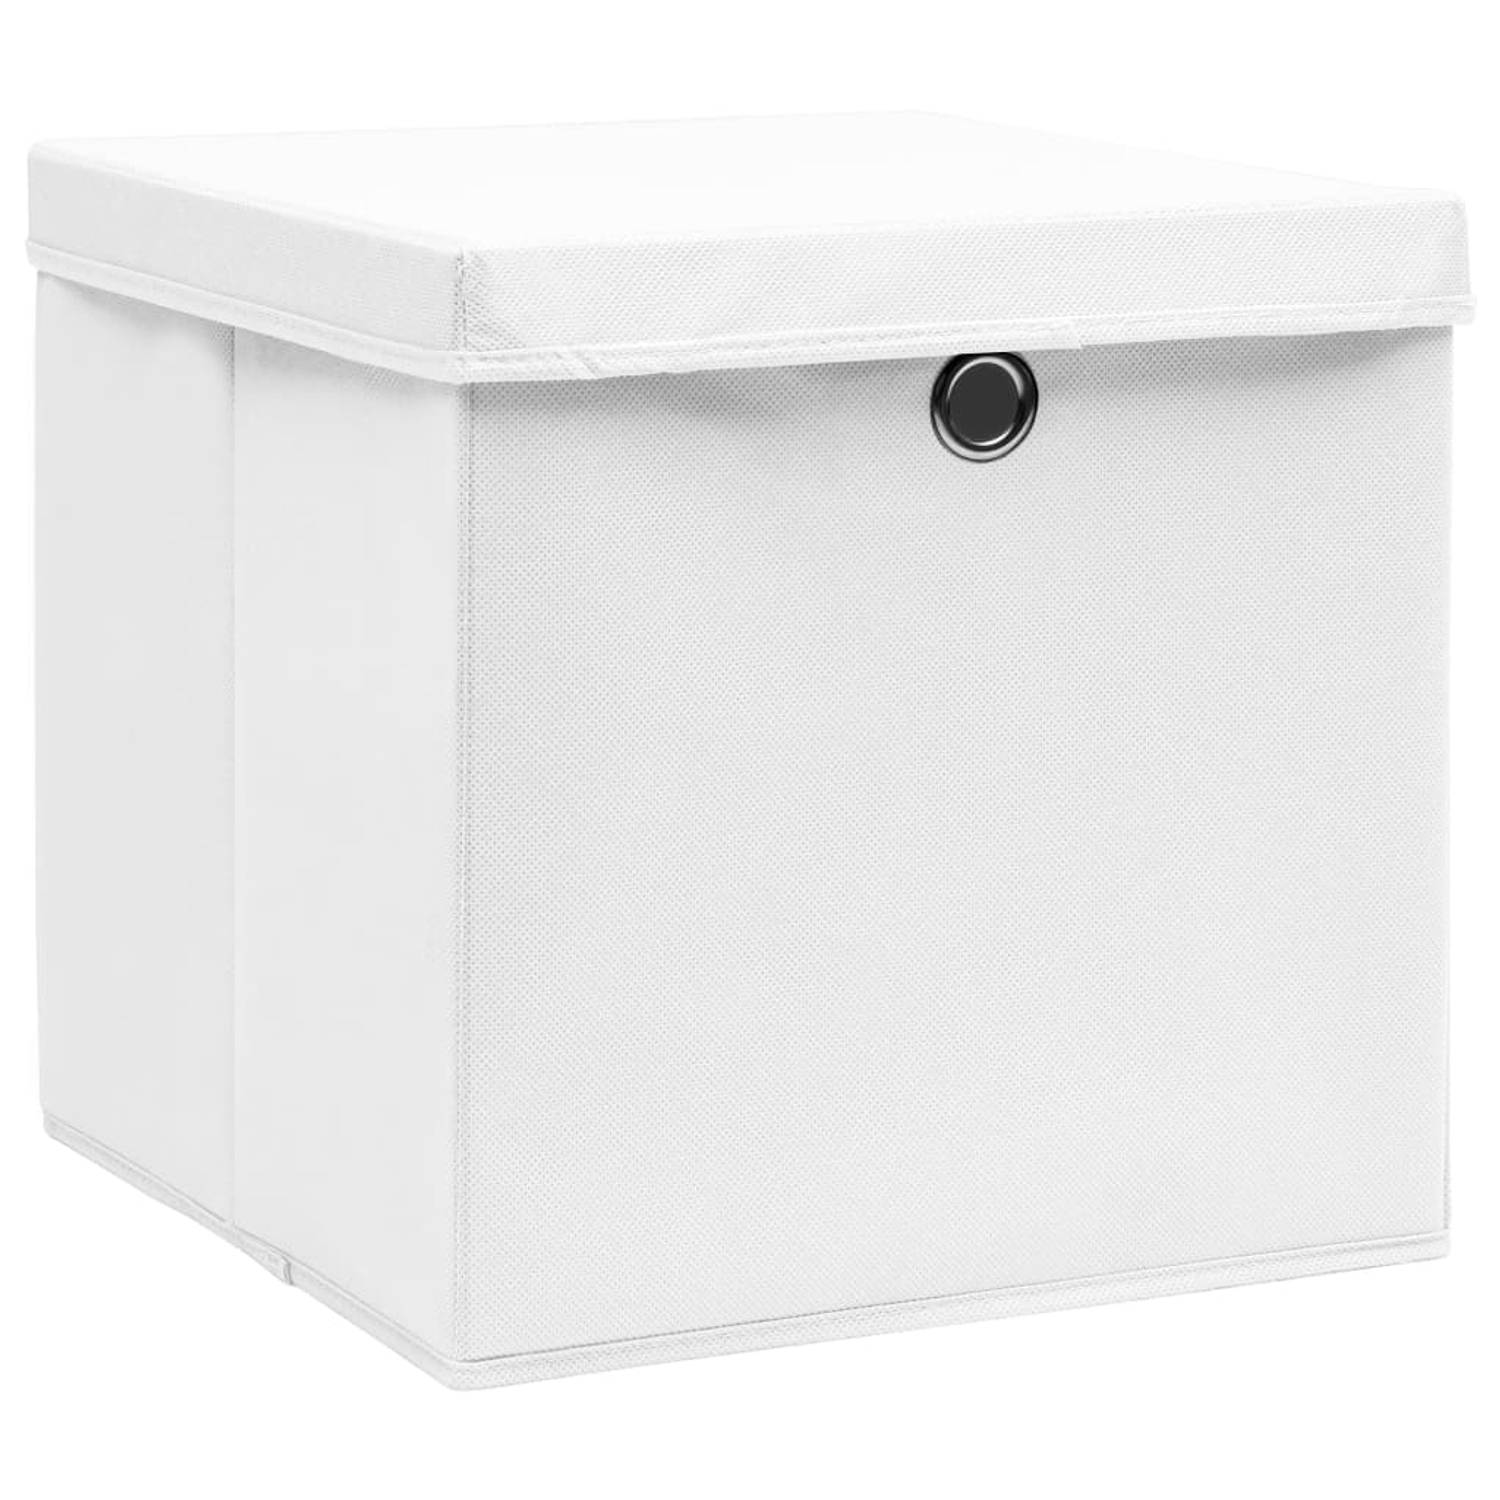 The Living Store Opbergboxen met deksels 10 st 32x32x32 cm stof wit - Opberger